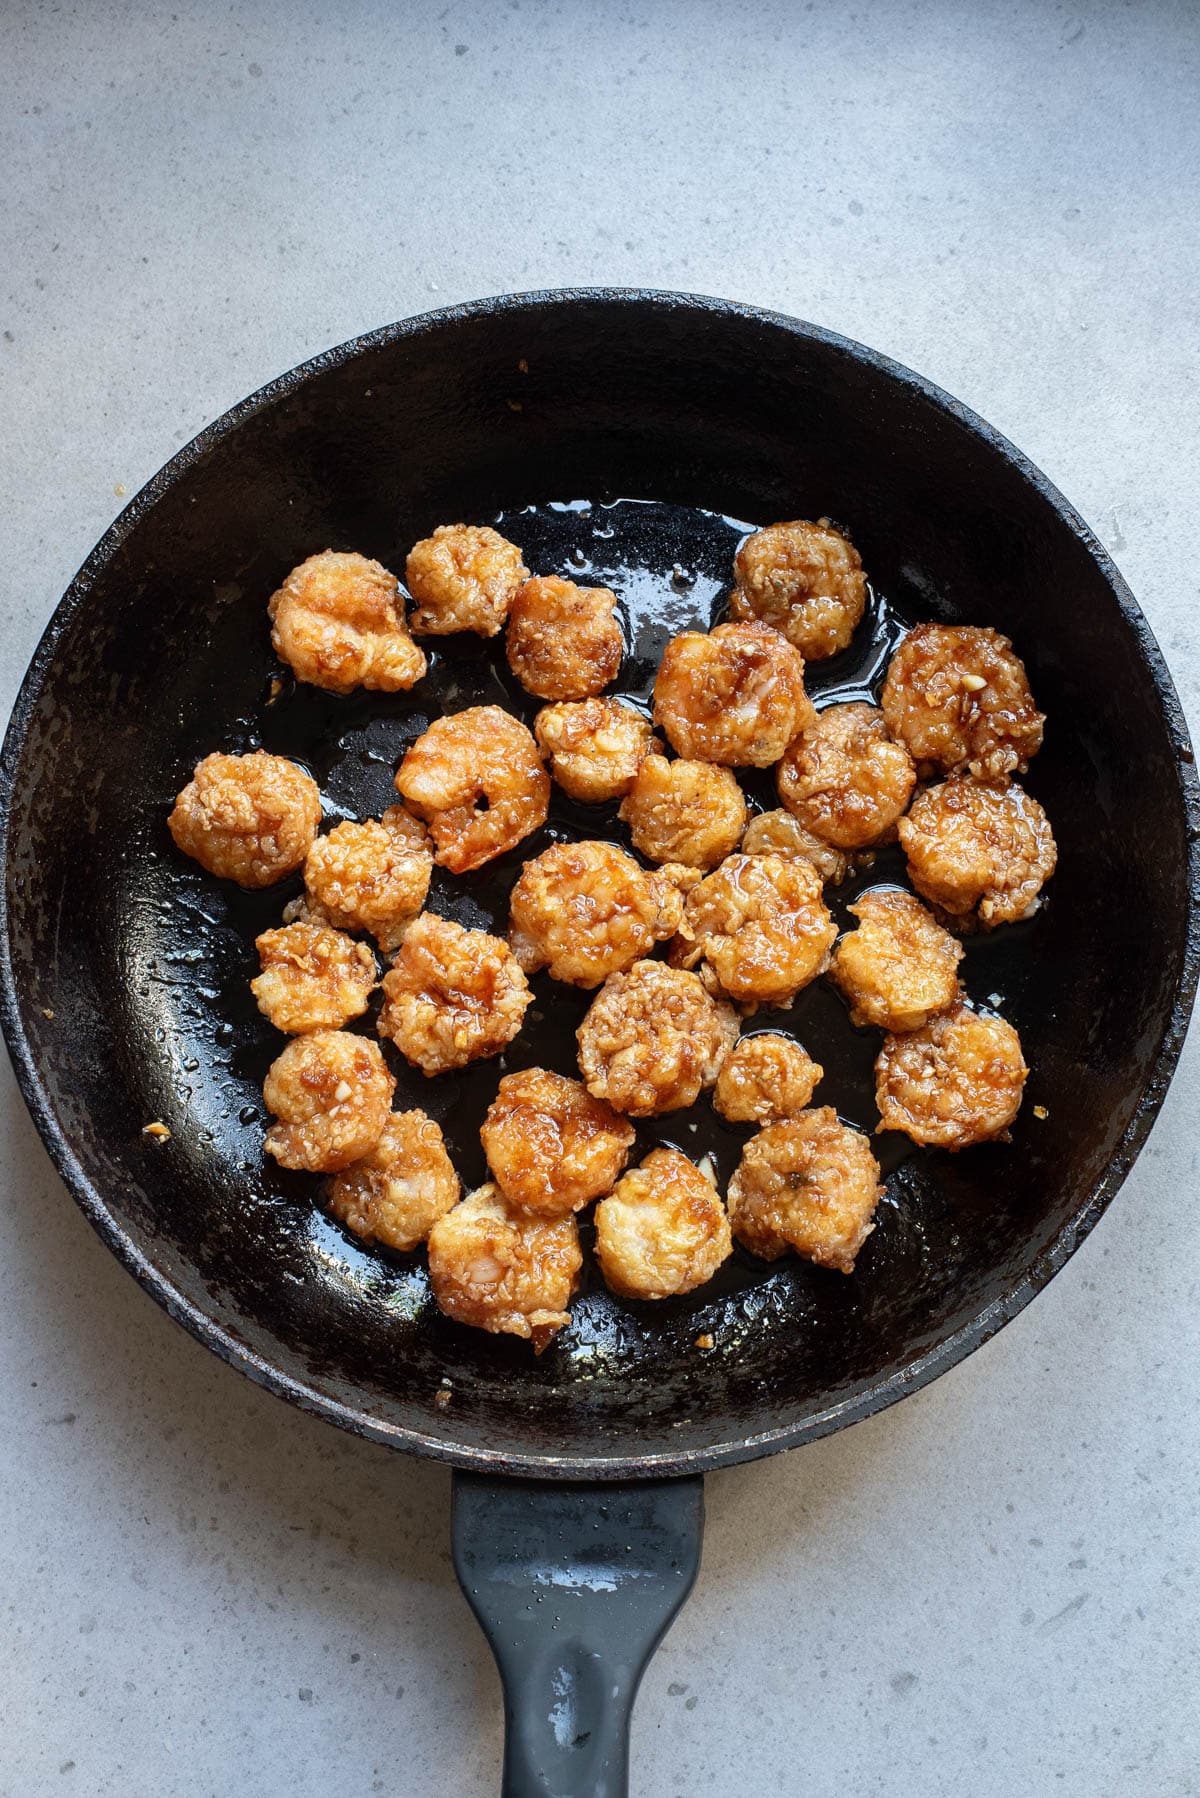 Fried shrimp with sauce in cast iron pan.